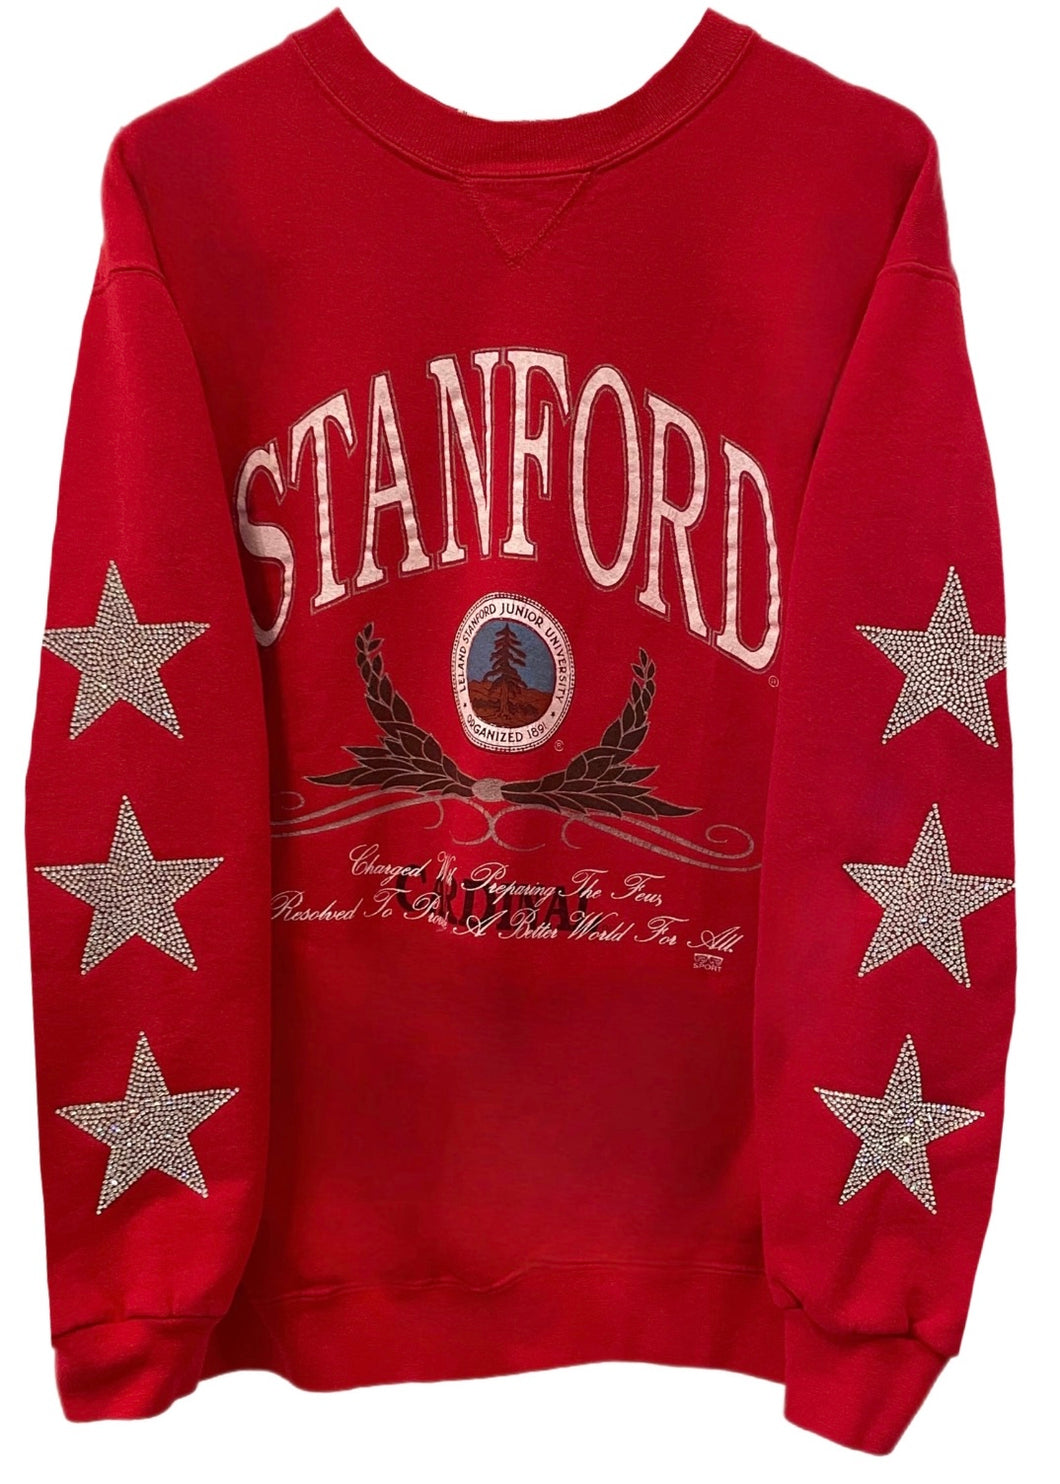 Stanford University, One of a KIND Vintage Sweatshirt with Three Crystal Star Design